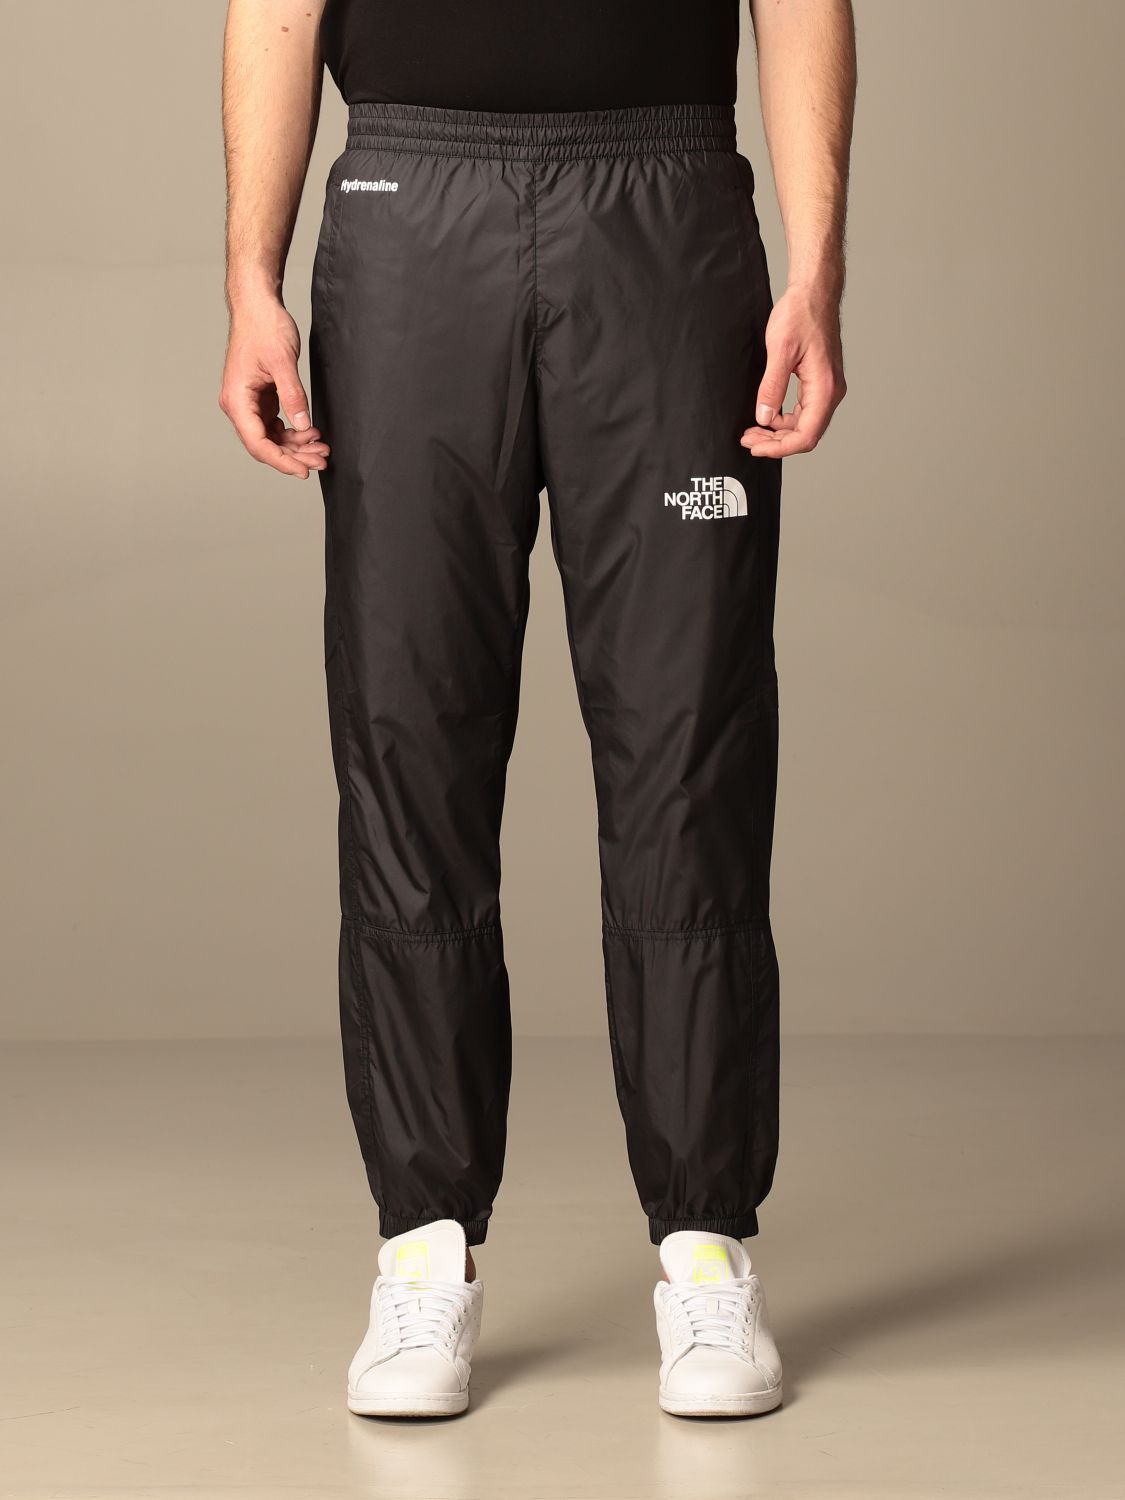 the north face black pants